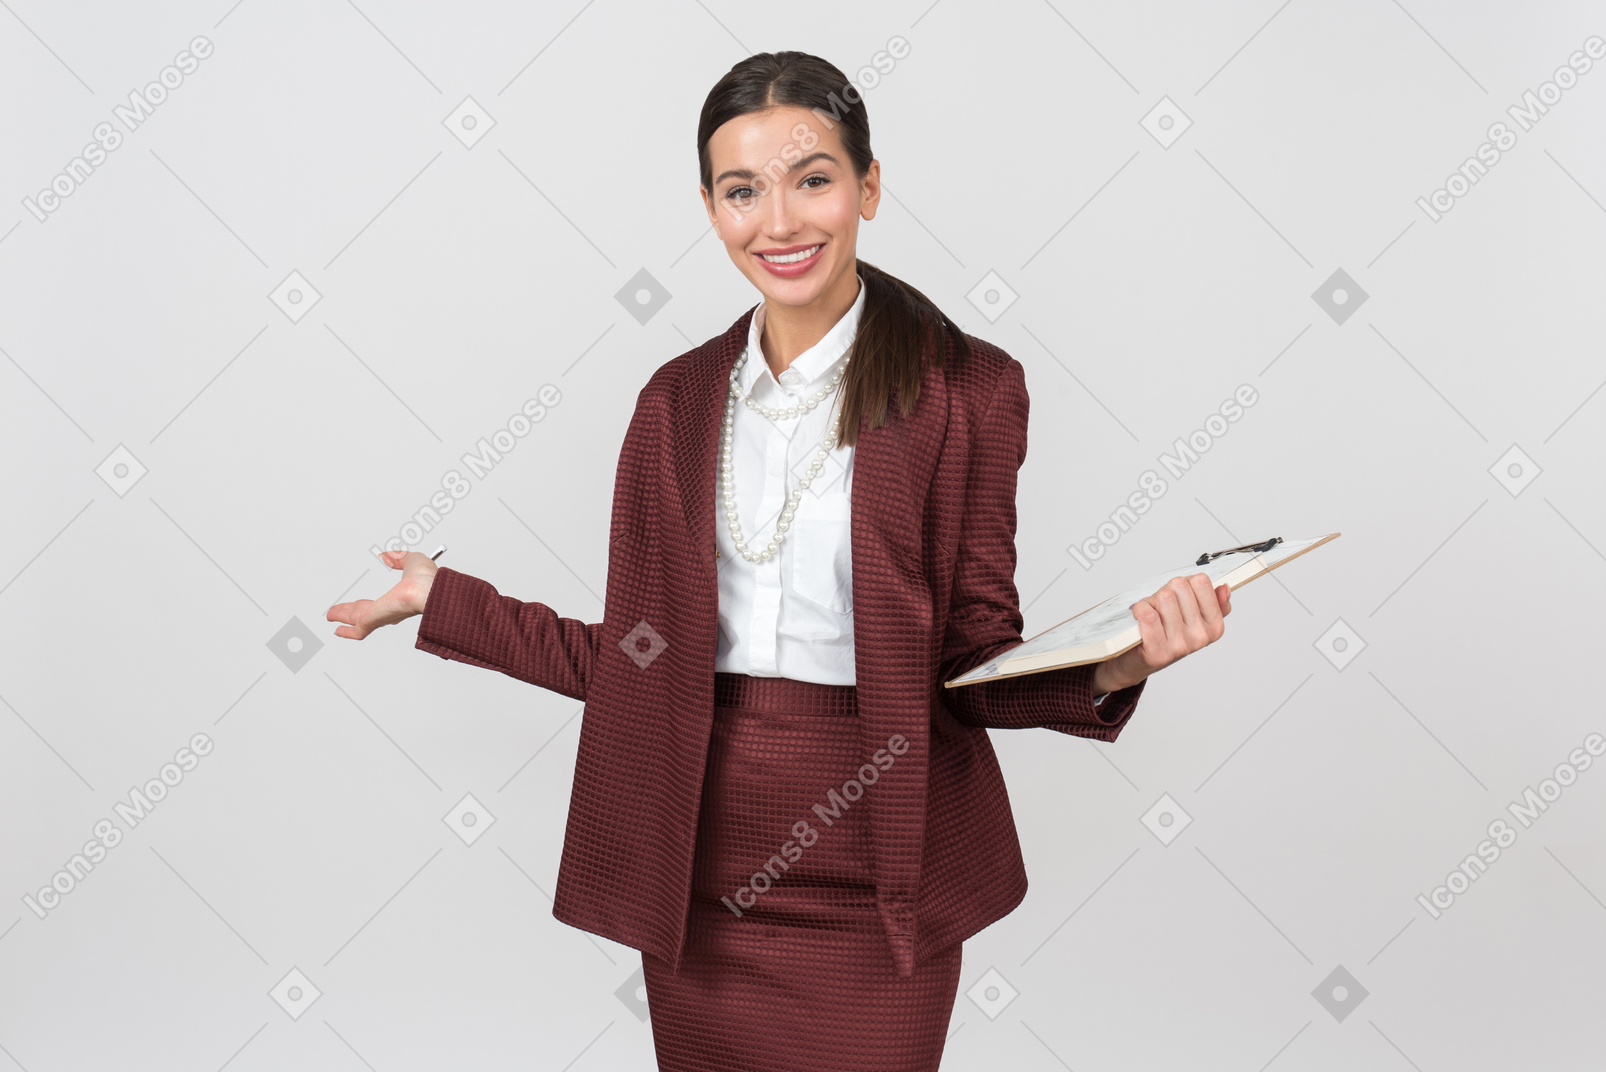 Attractive formally dressed woman looking pleased